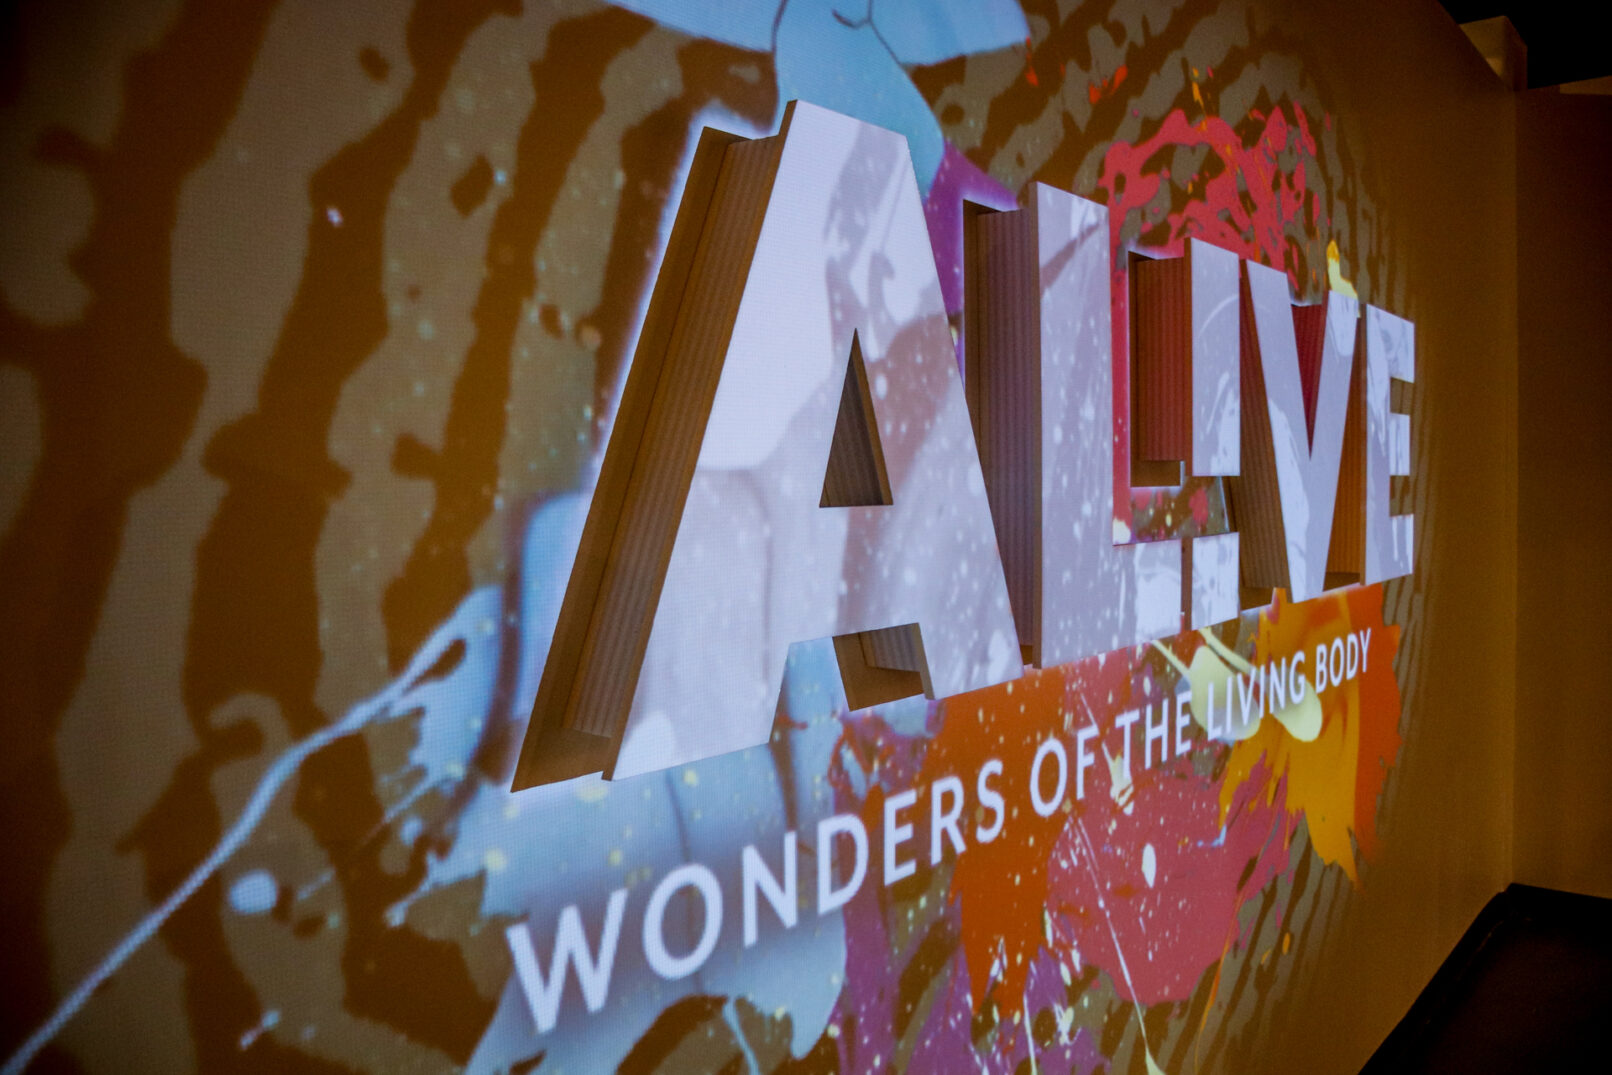 Alive: Wonders of the Human Body